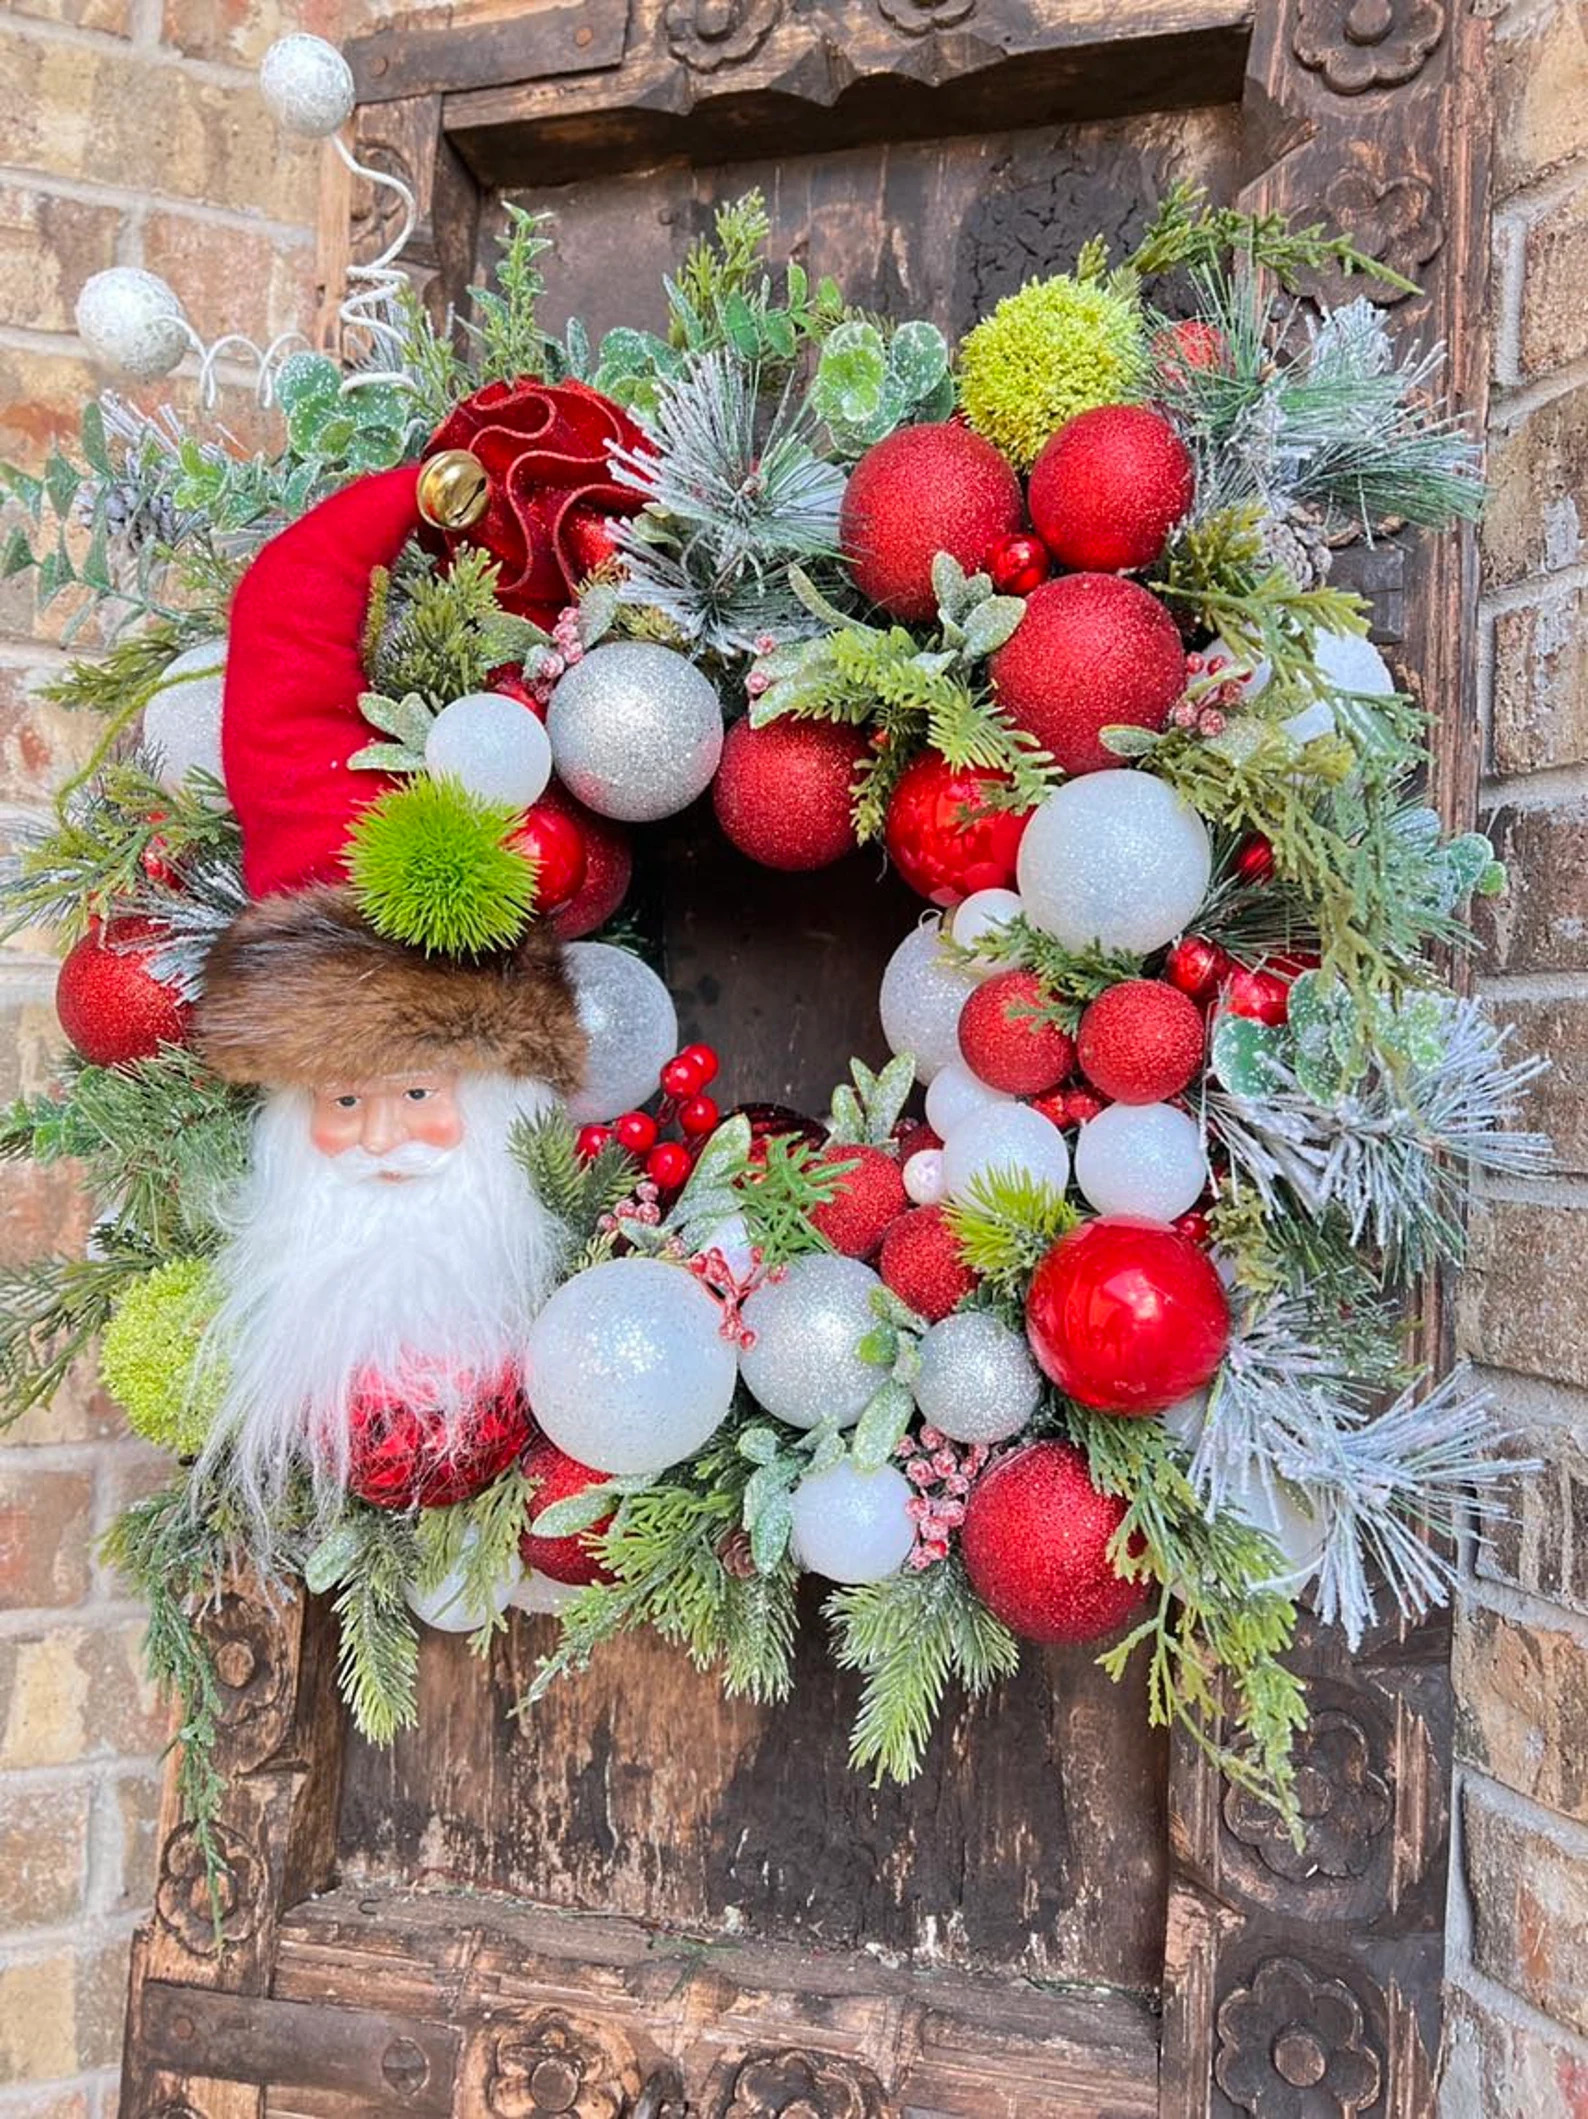 15 Quirky Santa Wreath Designs For Christmas